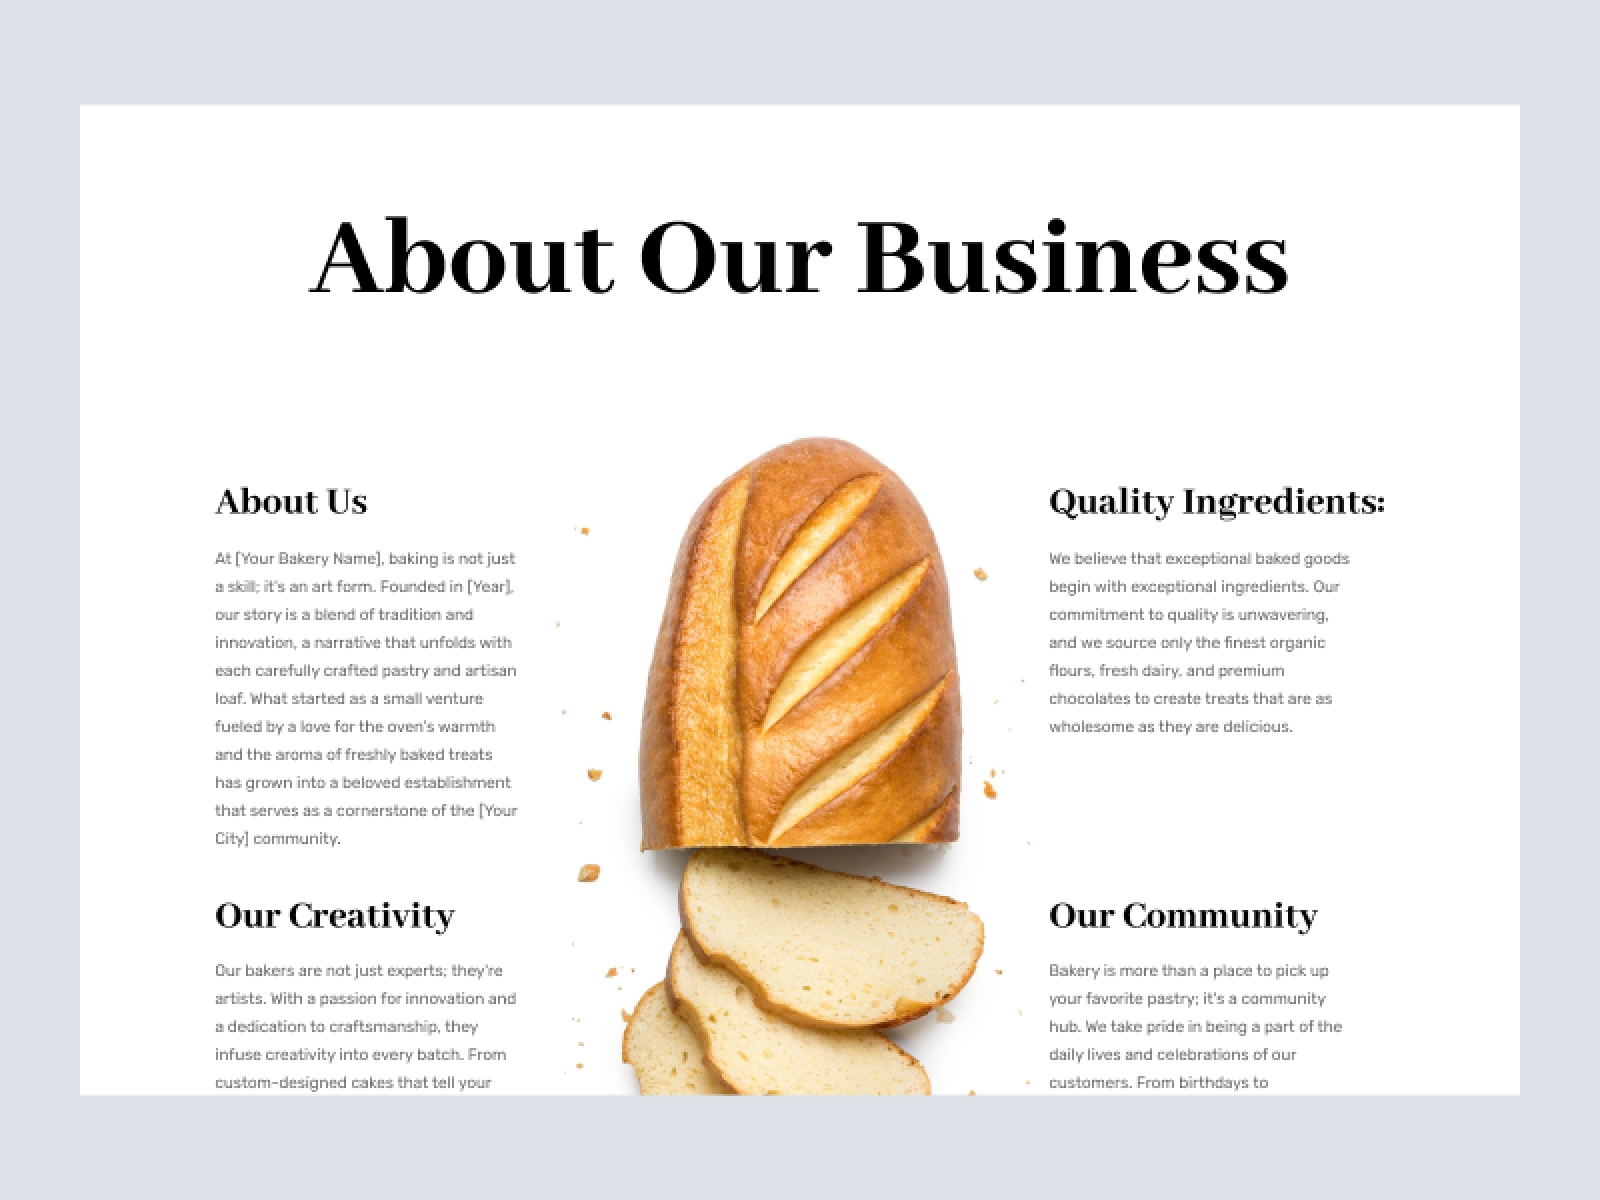 Bakery Shopify Store Design for Figma and Adobe XD - screen 5